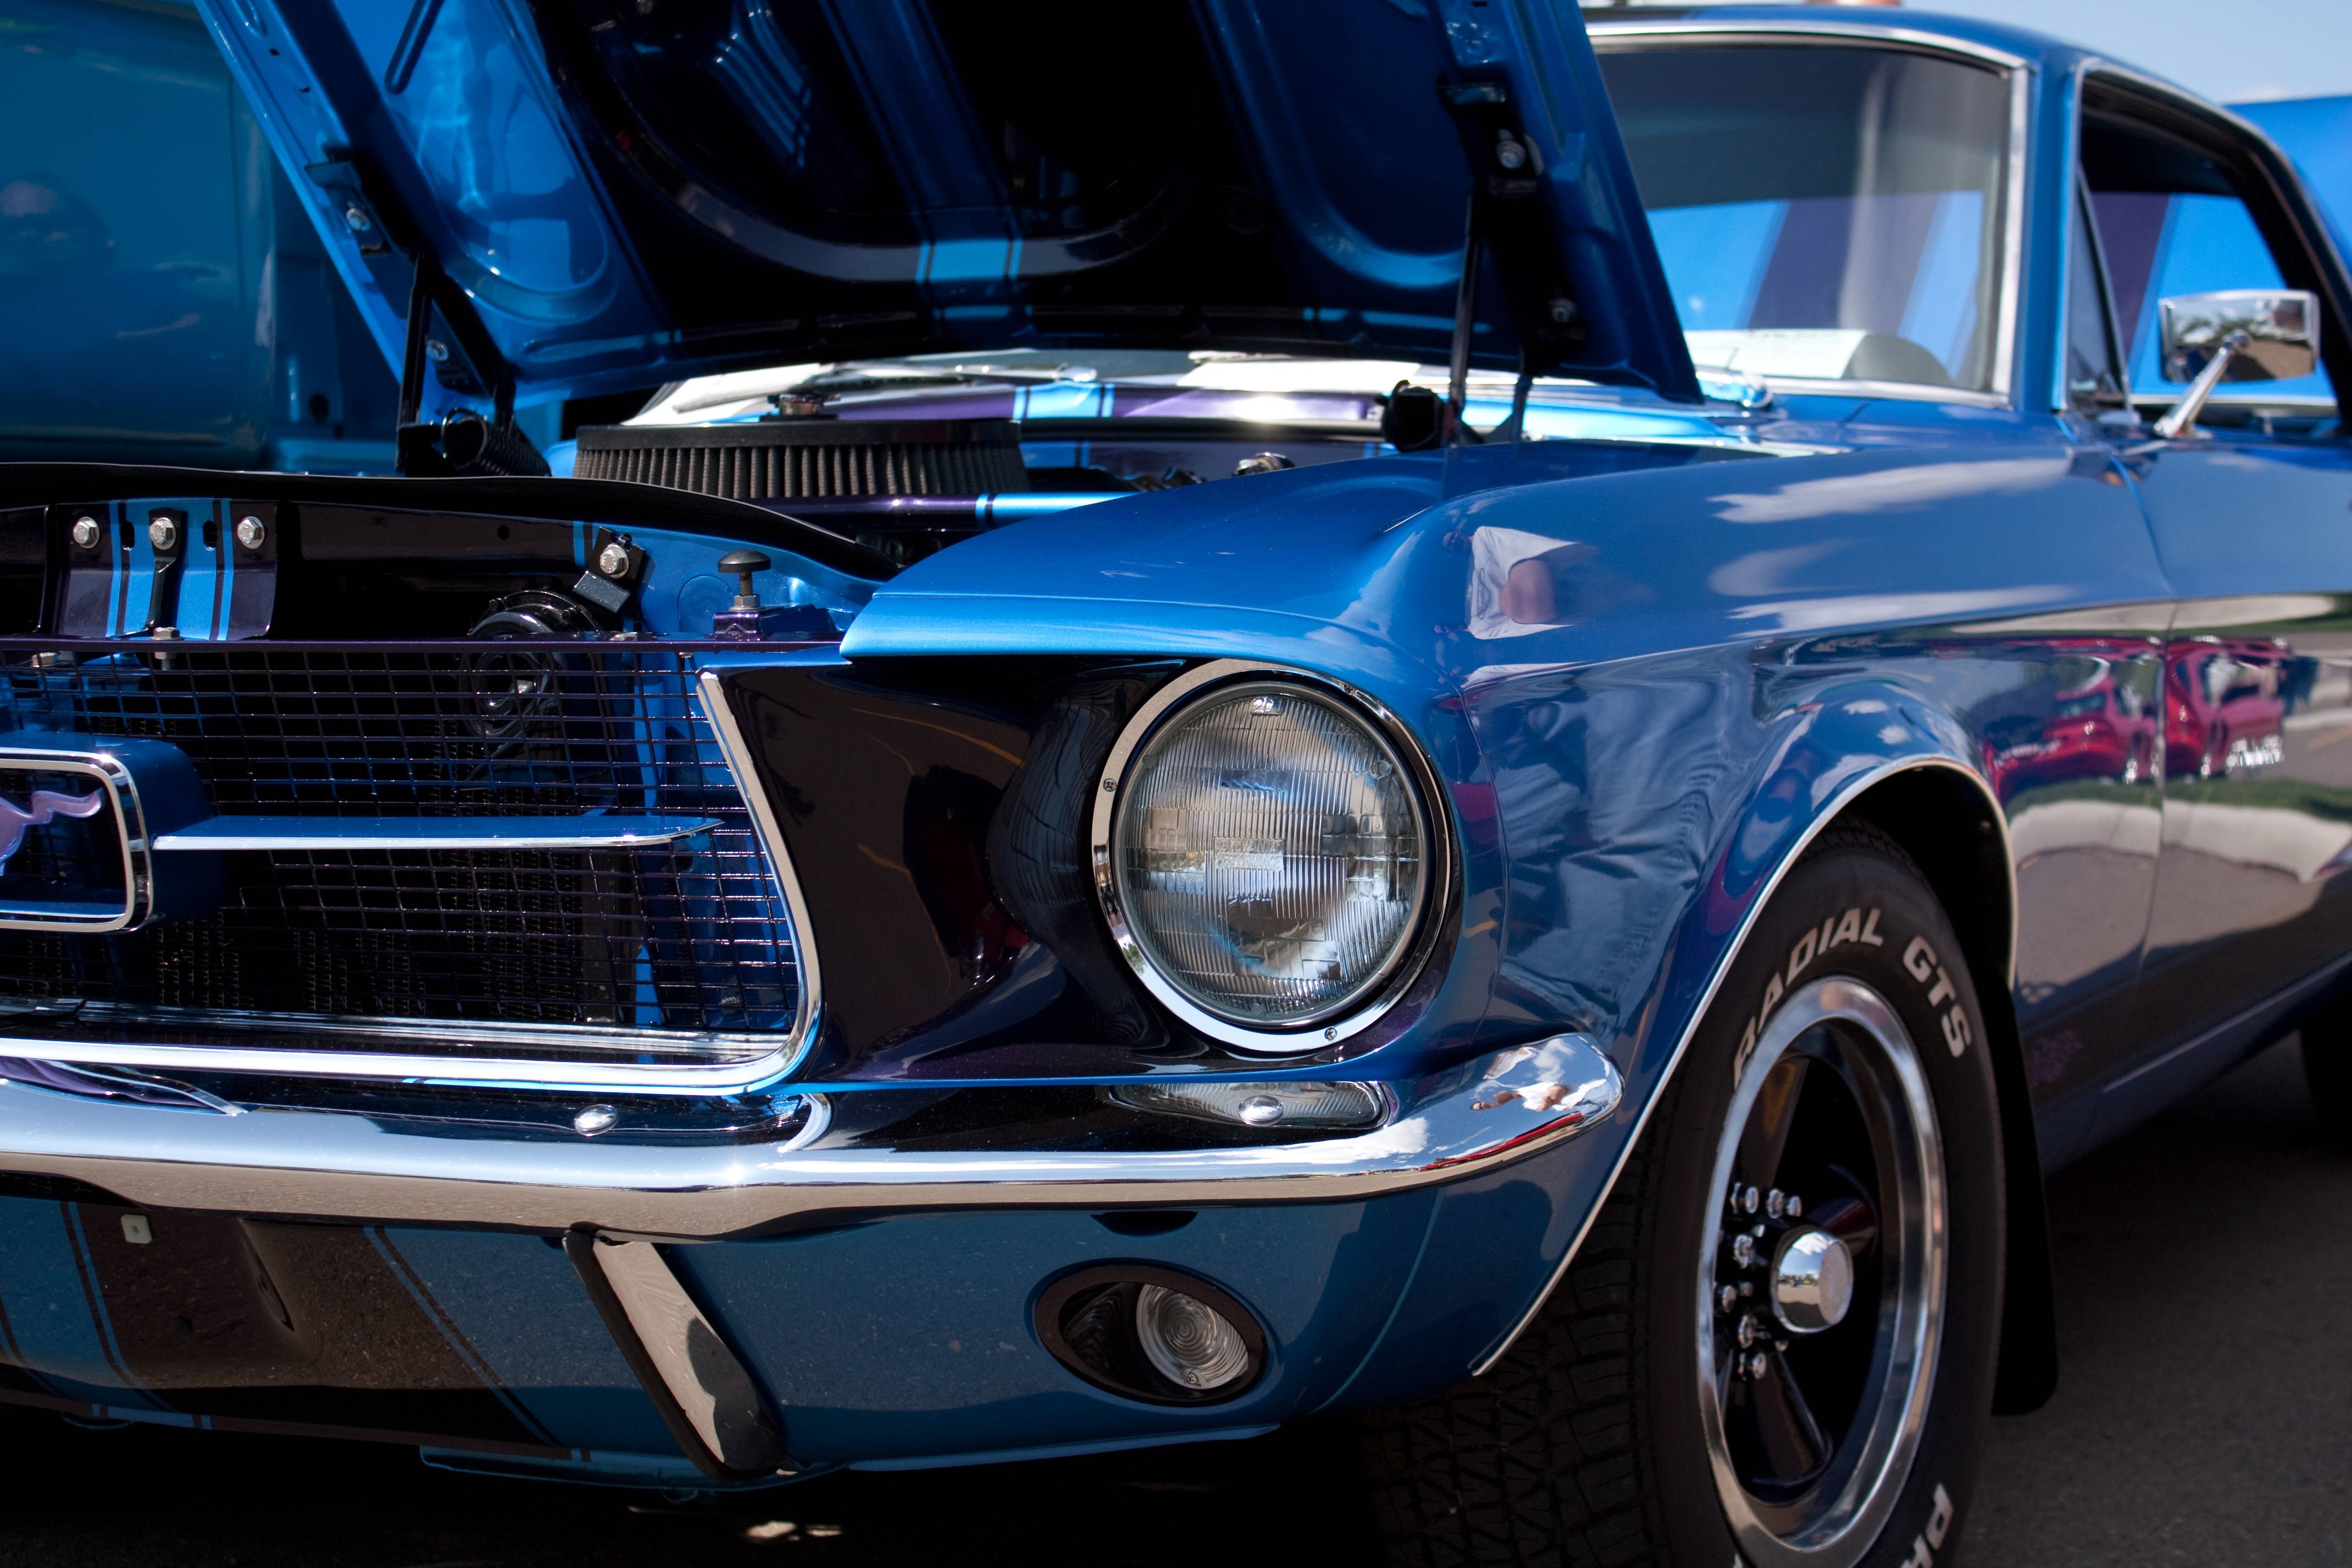 image For > 1967 Mustang Coupe Blue